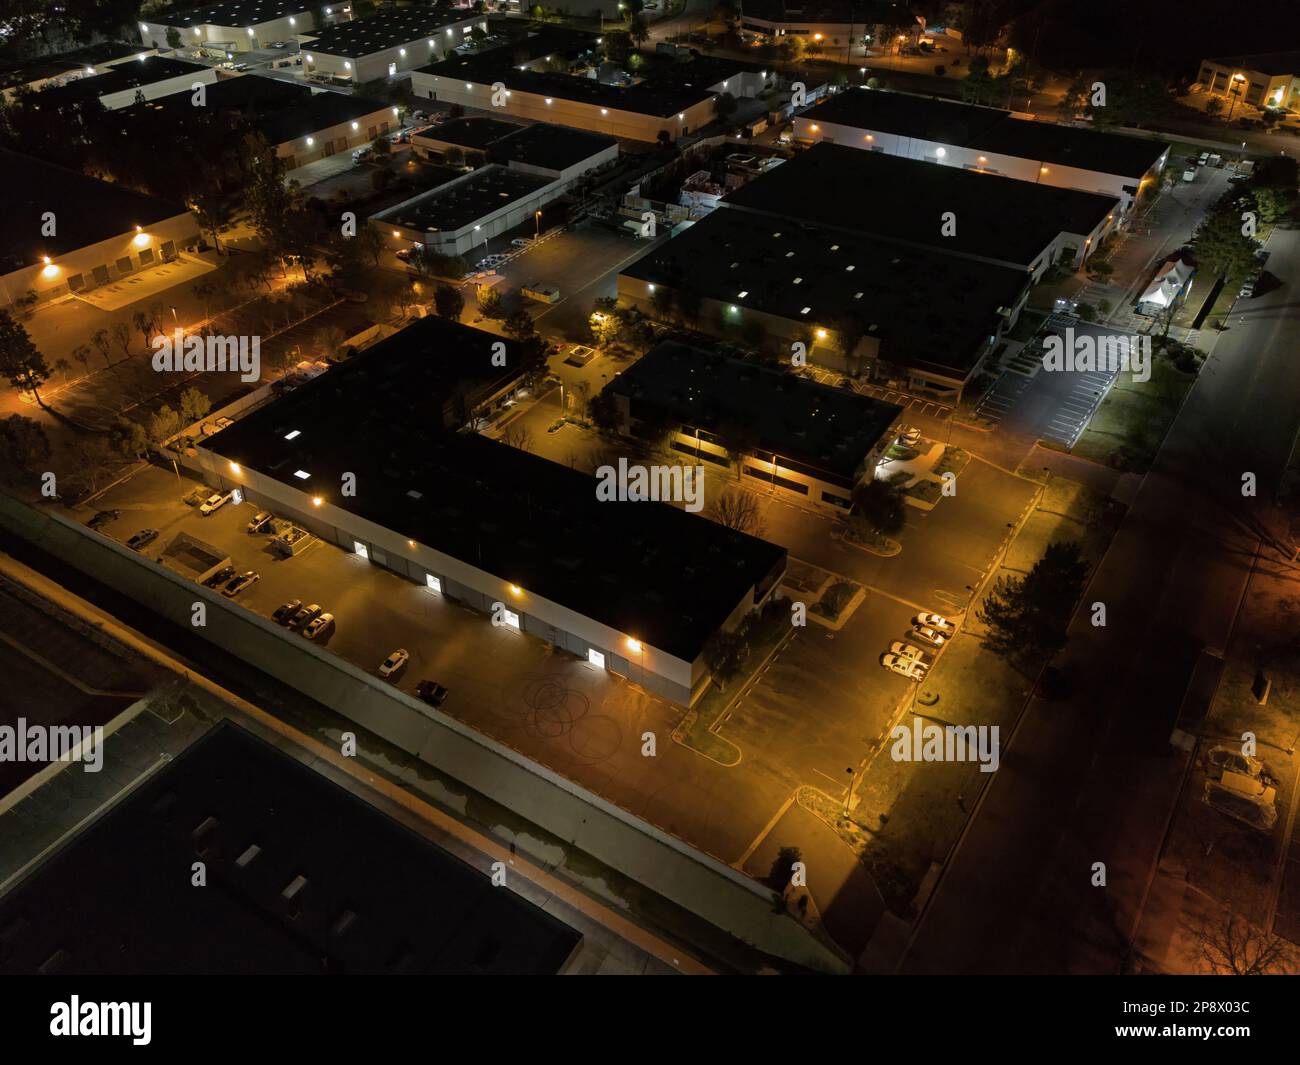 Nondescript warehouses and office buildings are shown in an industrial business park from an overhead view at night. Stock Photo